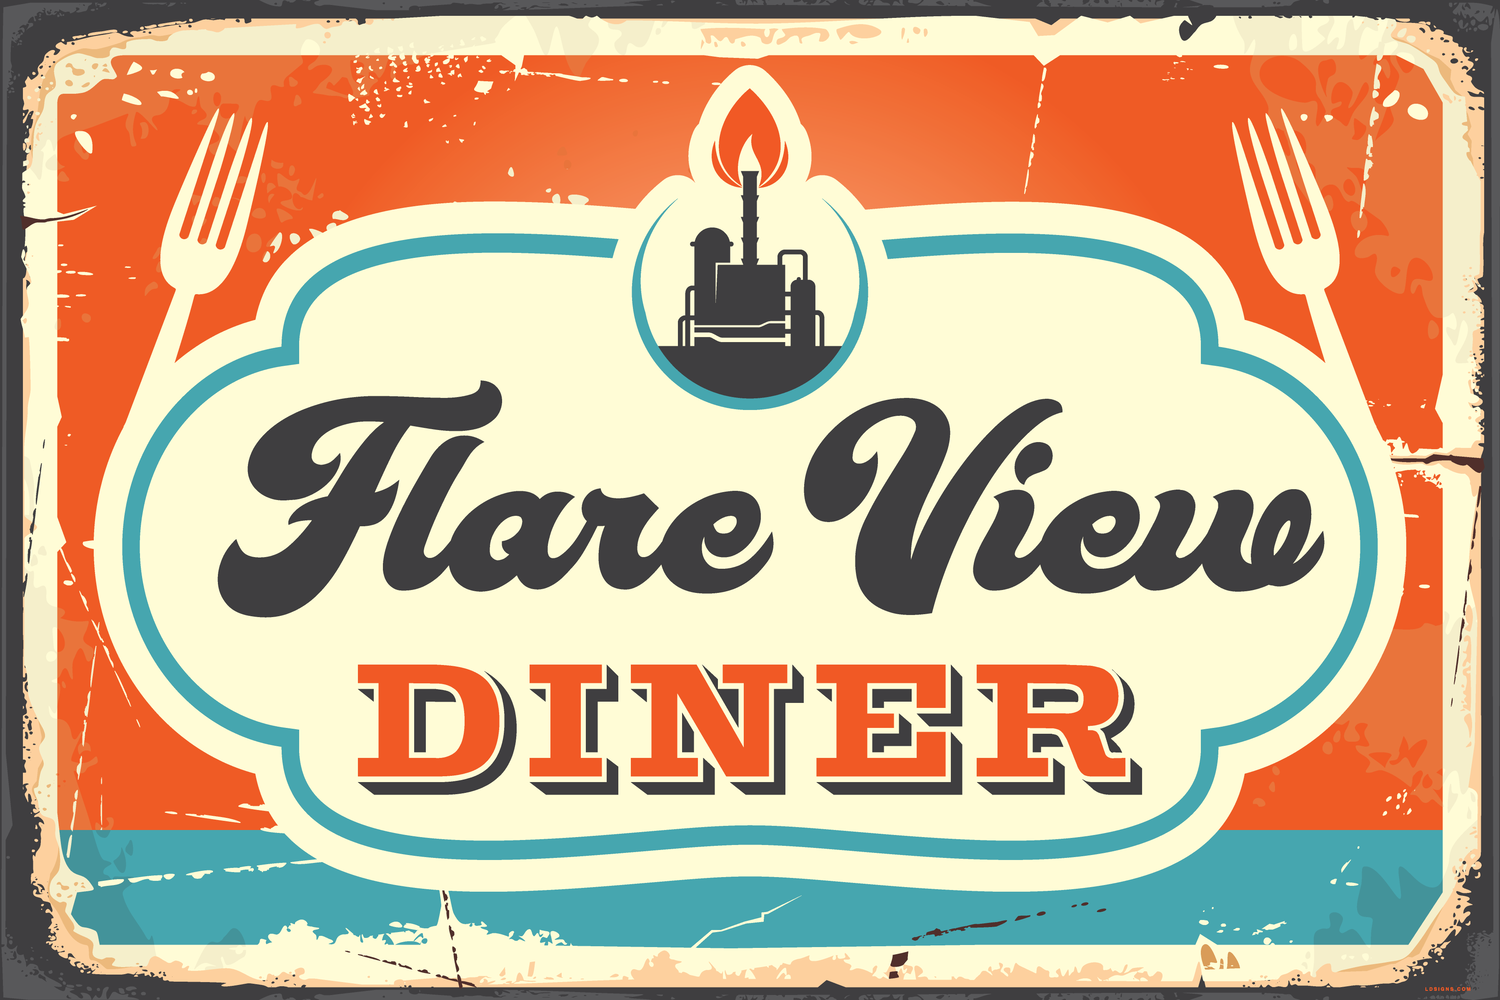 Flare View Diner